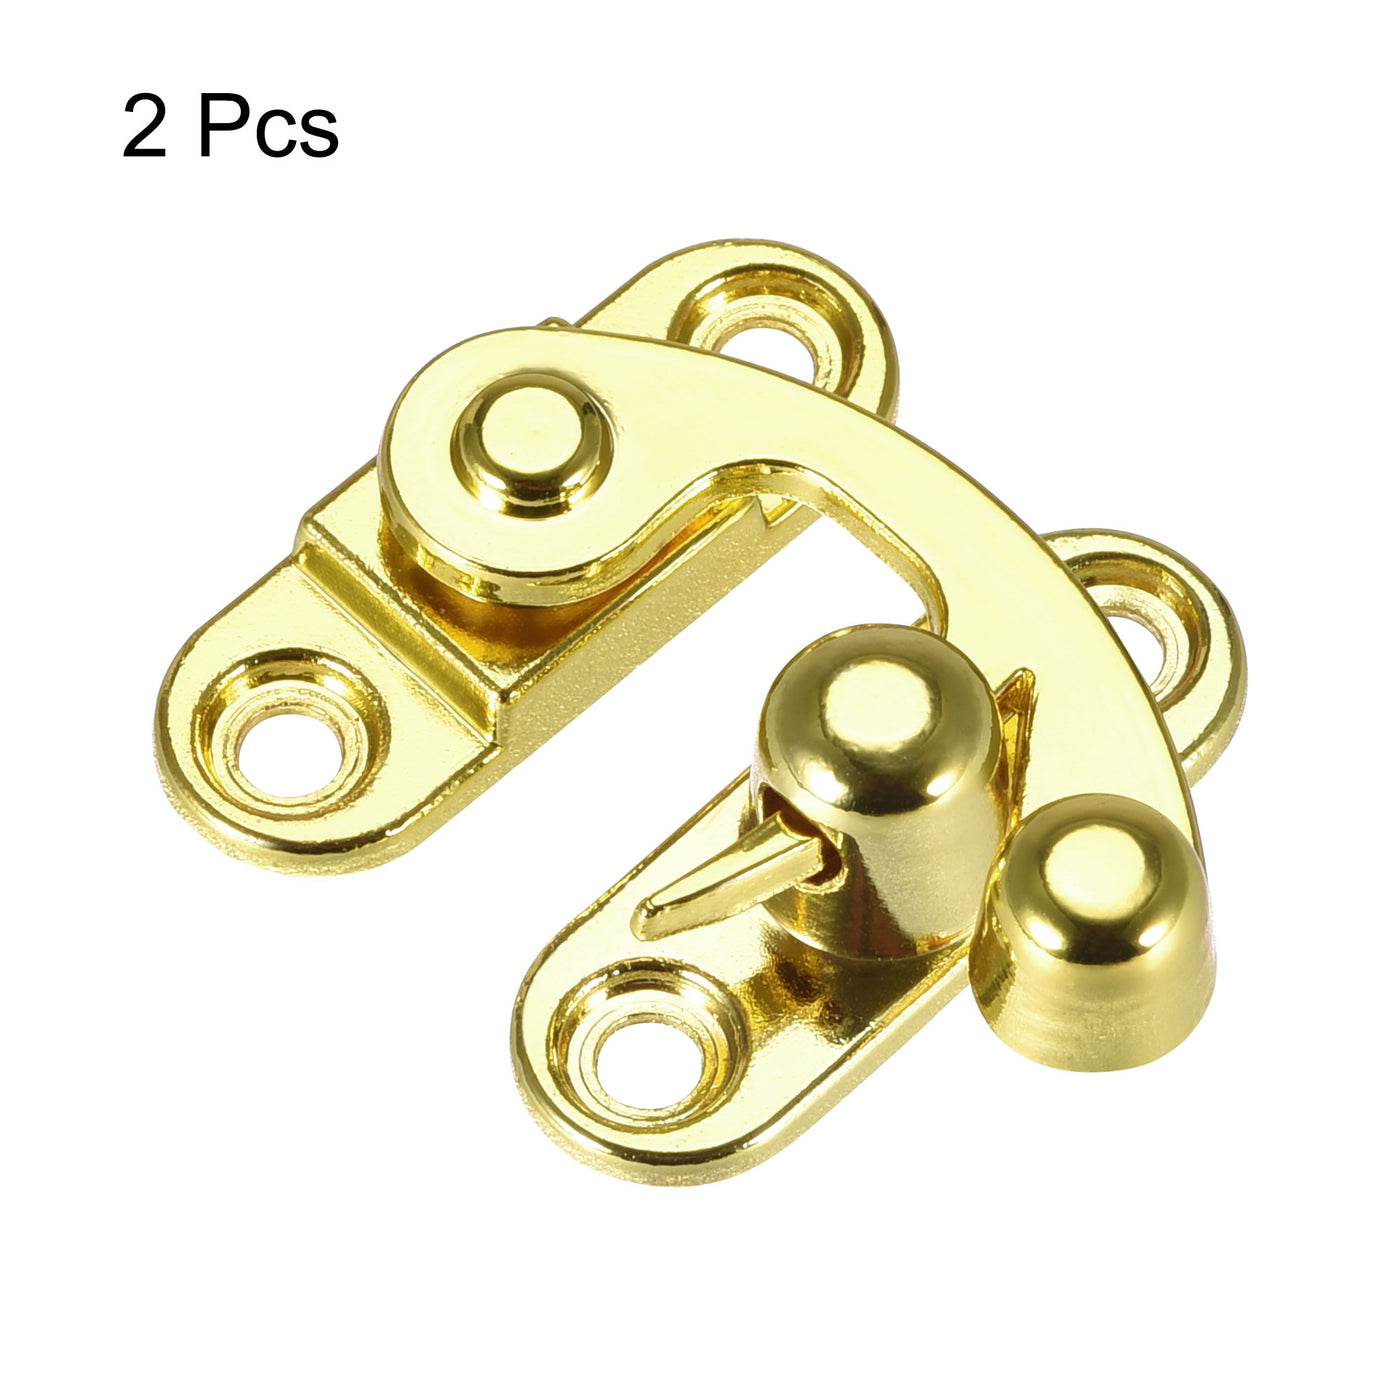 uxcell Uxcell Antique Vintage Lock Clasp Right Latch Hook Hasp 33mmx28mm Swing Arm Latch Gold Tone 2 Pcs